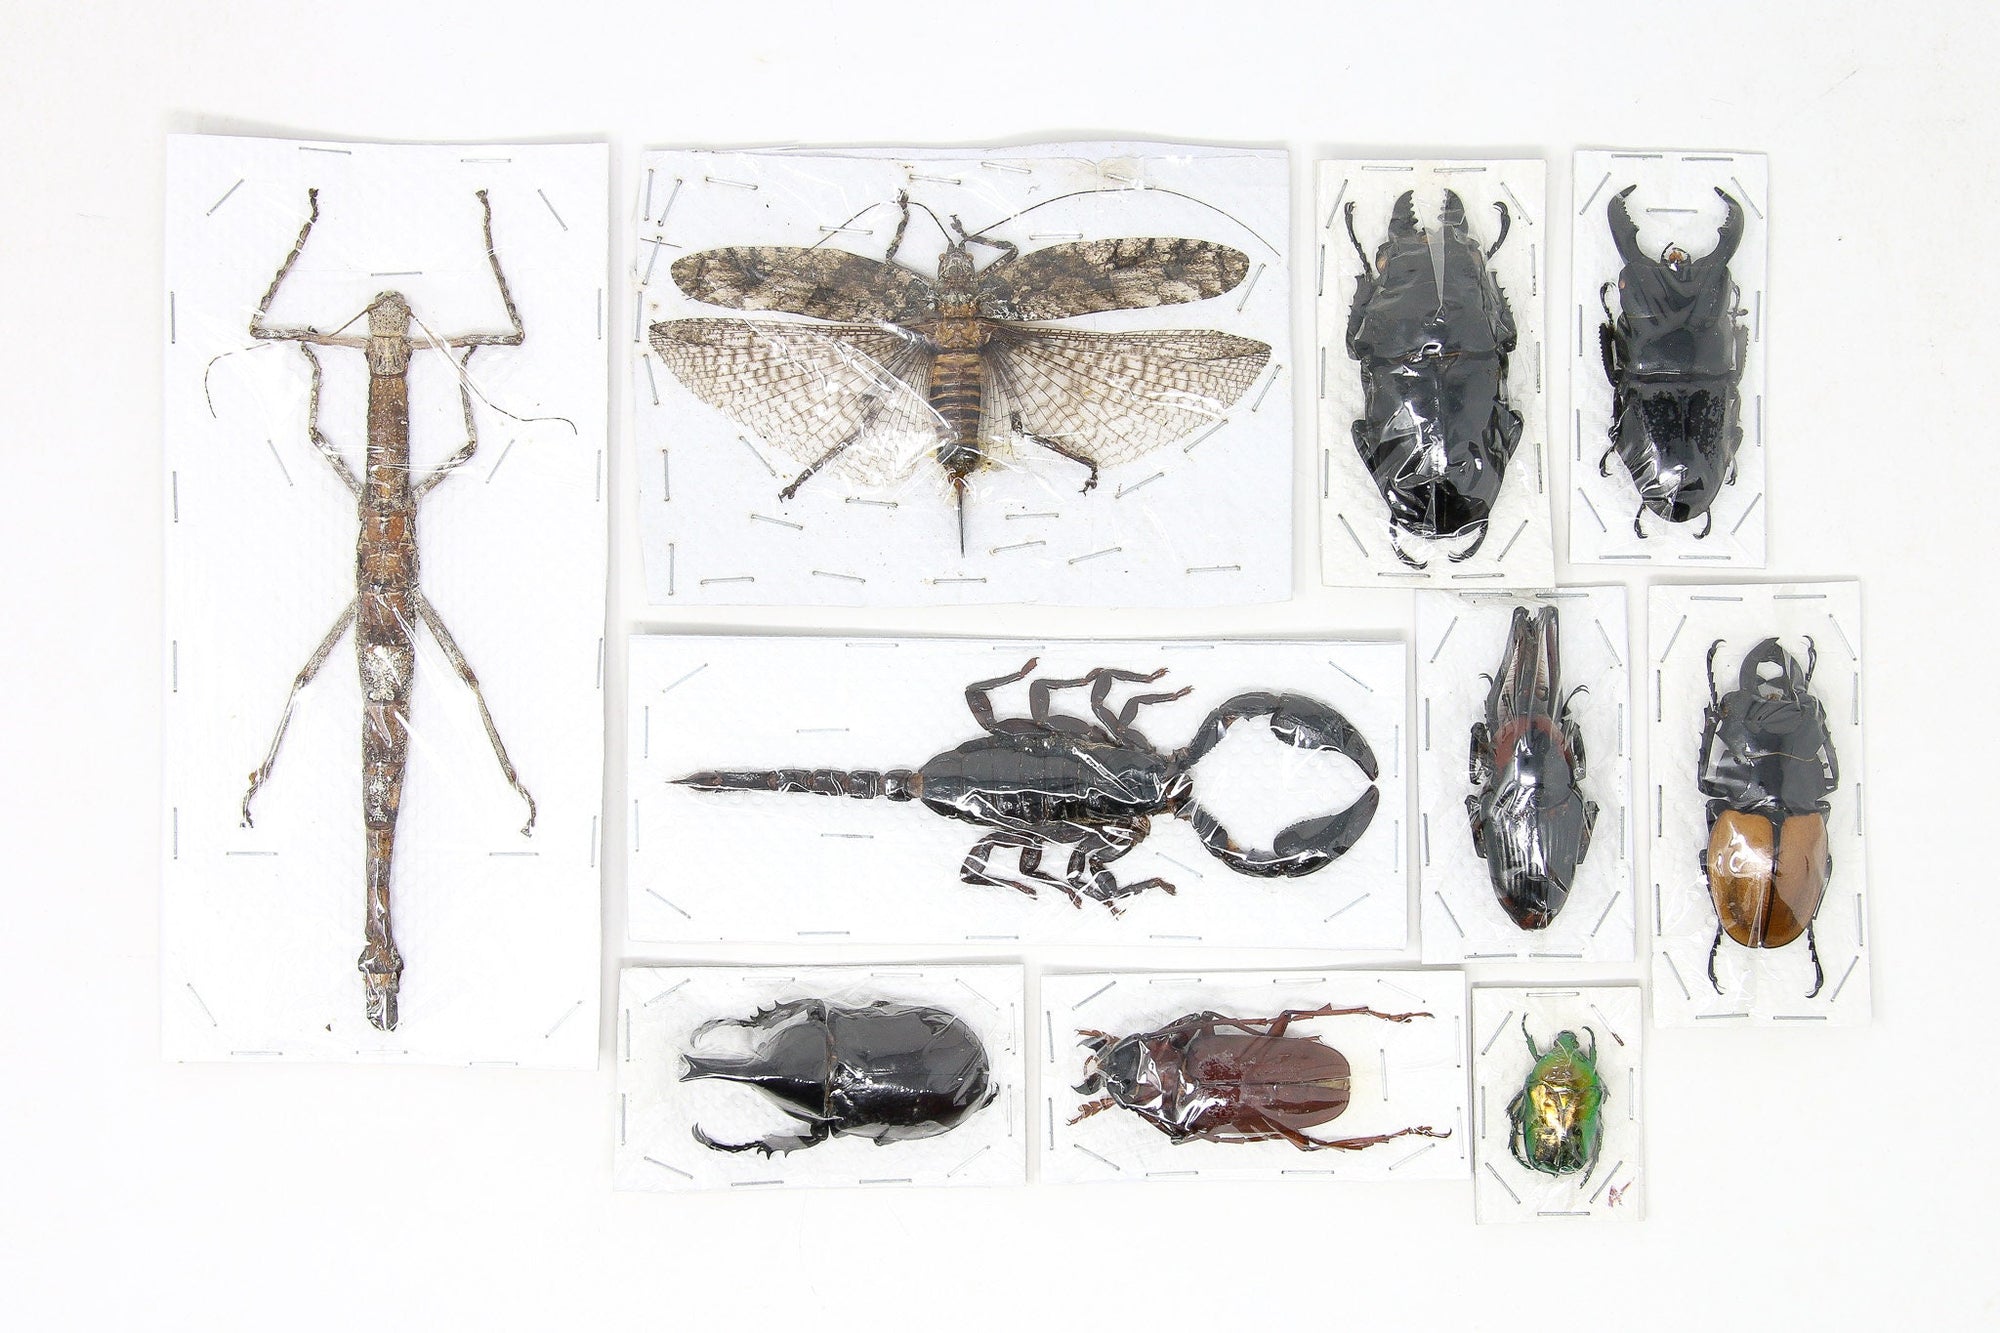 Assorted Entomolgy Specimens (Thailand) A1 Unmounted Dried Insect Collection, LOT*050